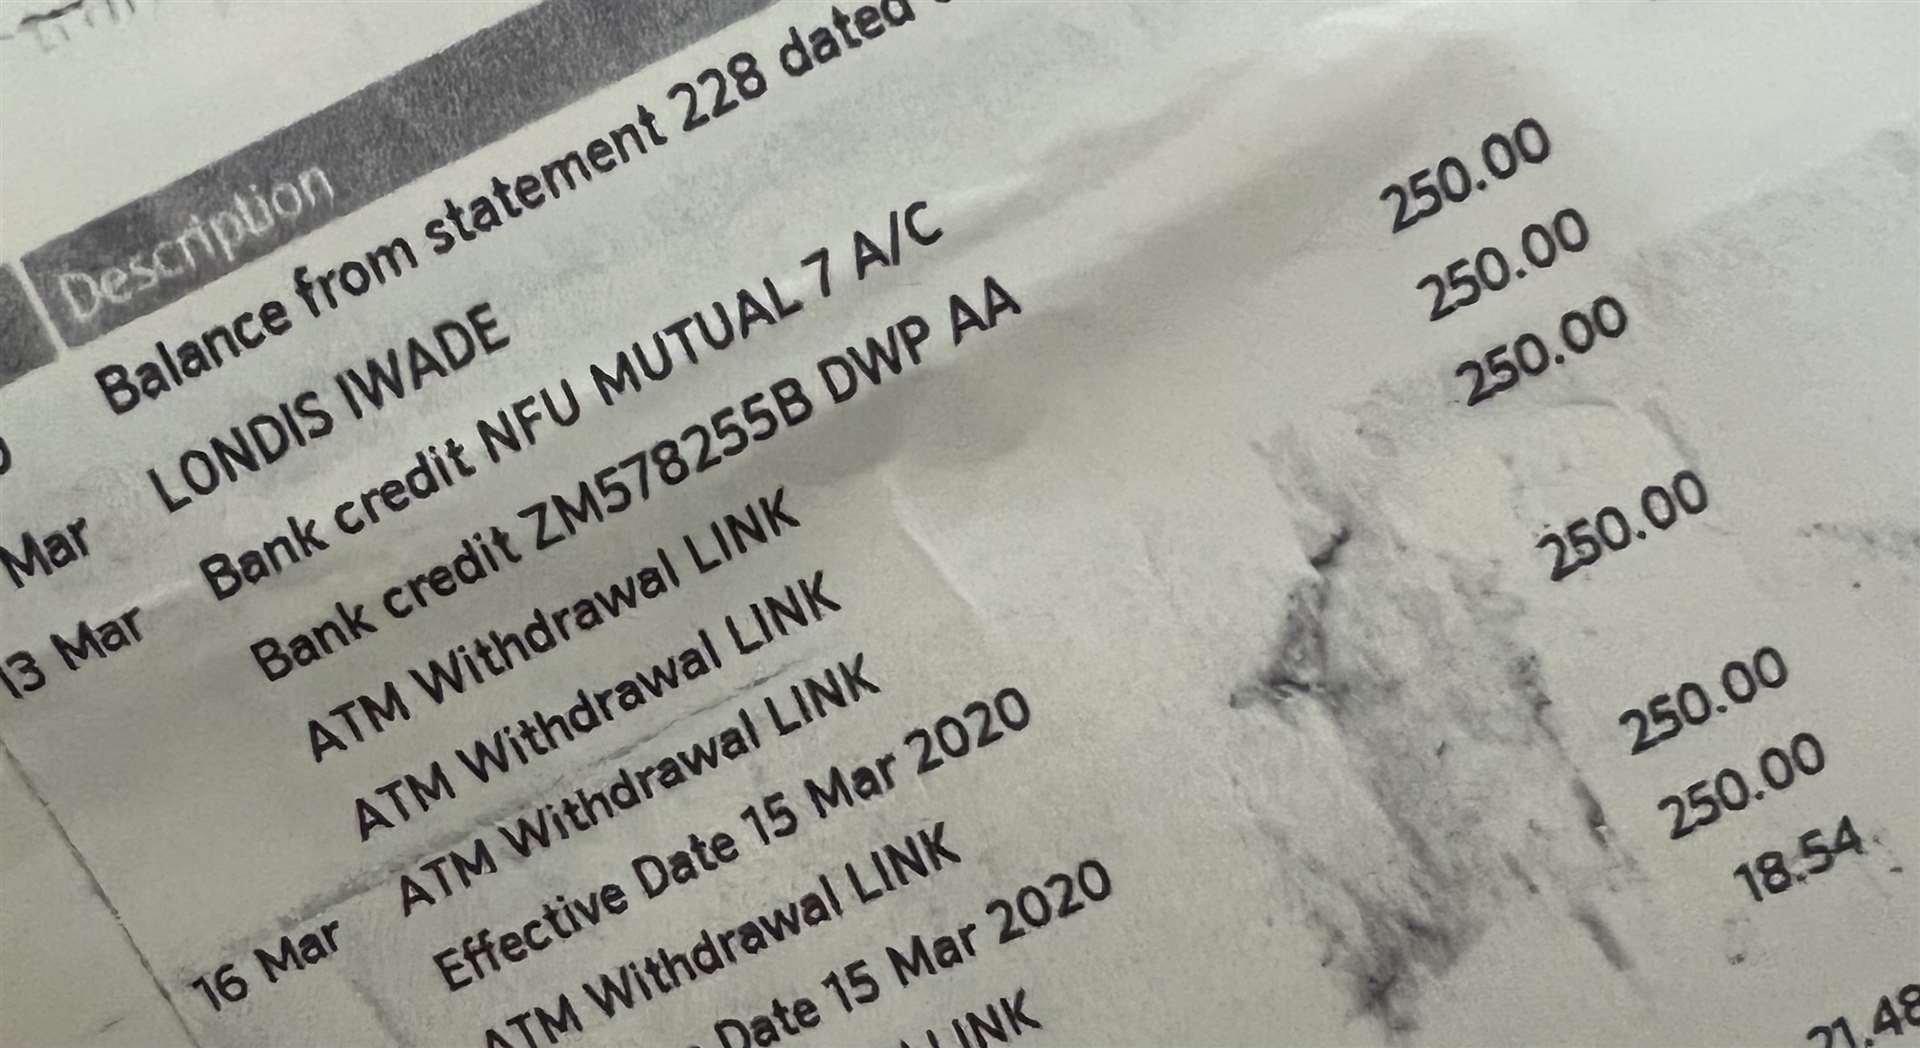 Ann Baldock's bank statements show Gemma Day's withdrawals from her account